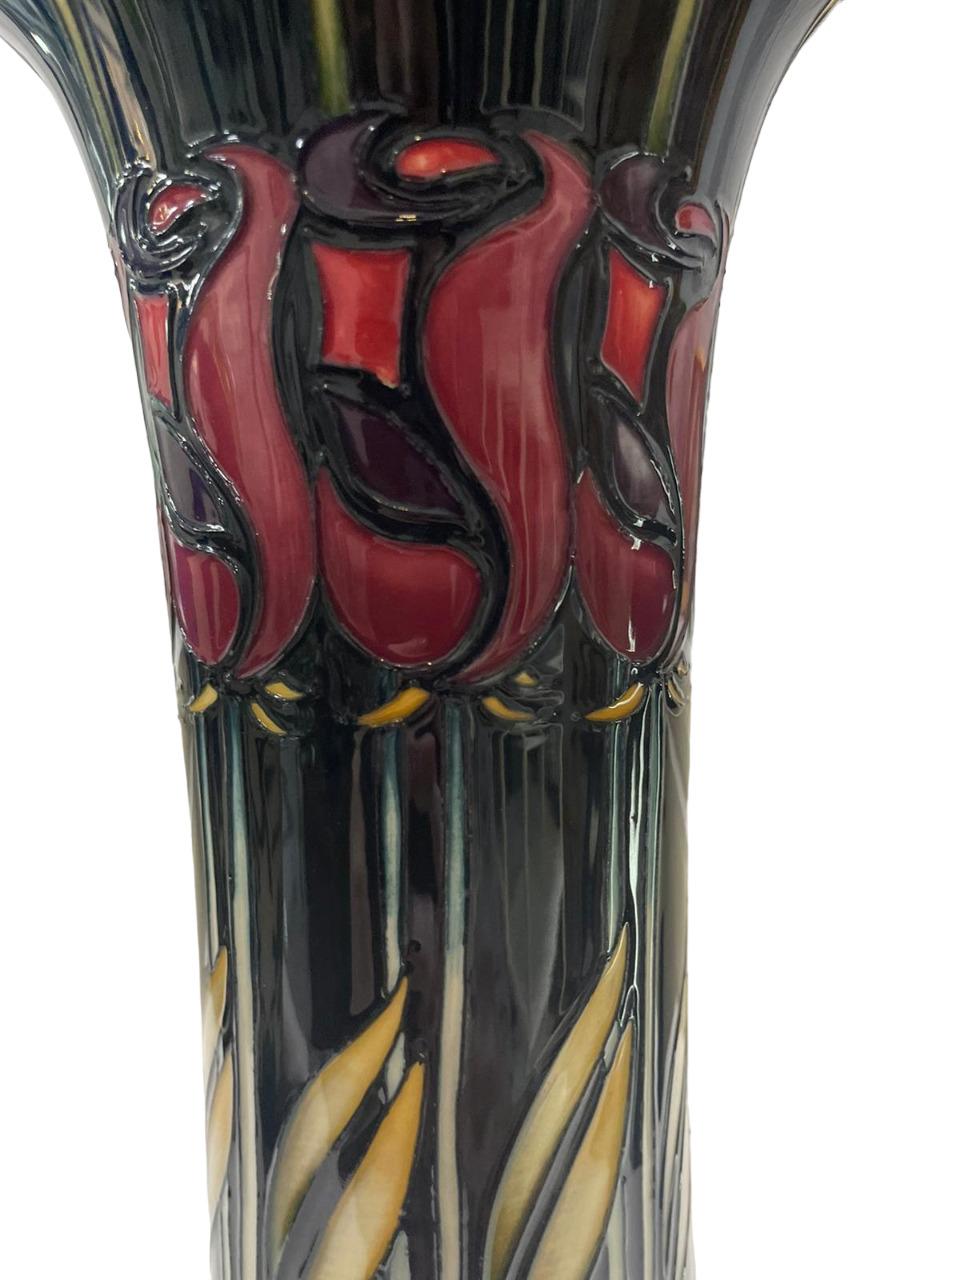 Glazed DISCONTINUED MOORCROFT Night ROSE pattern by Nicola Slaney, dated 2000. Boxed For Sale